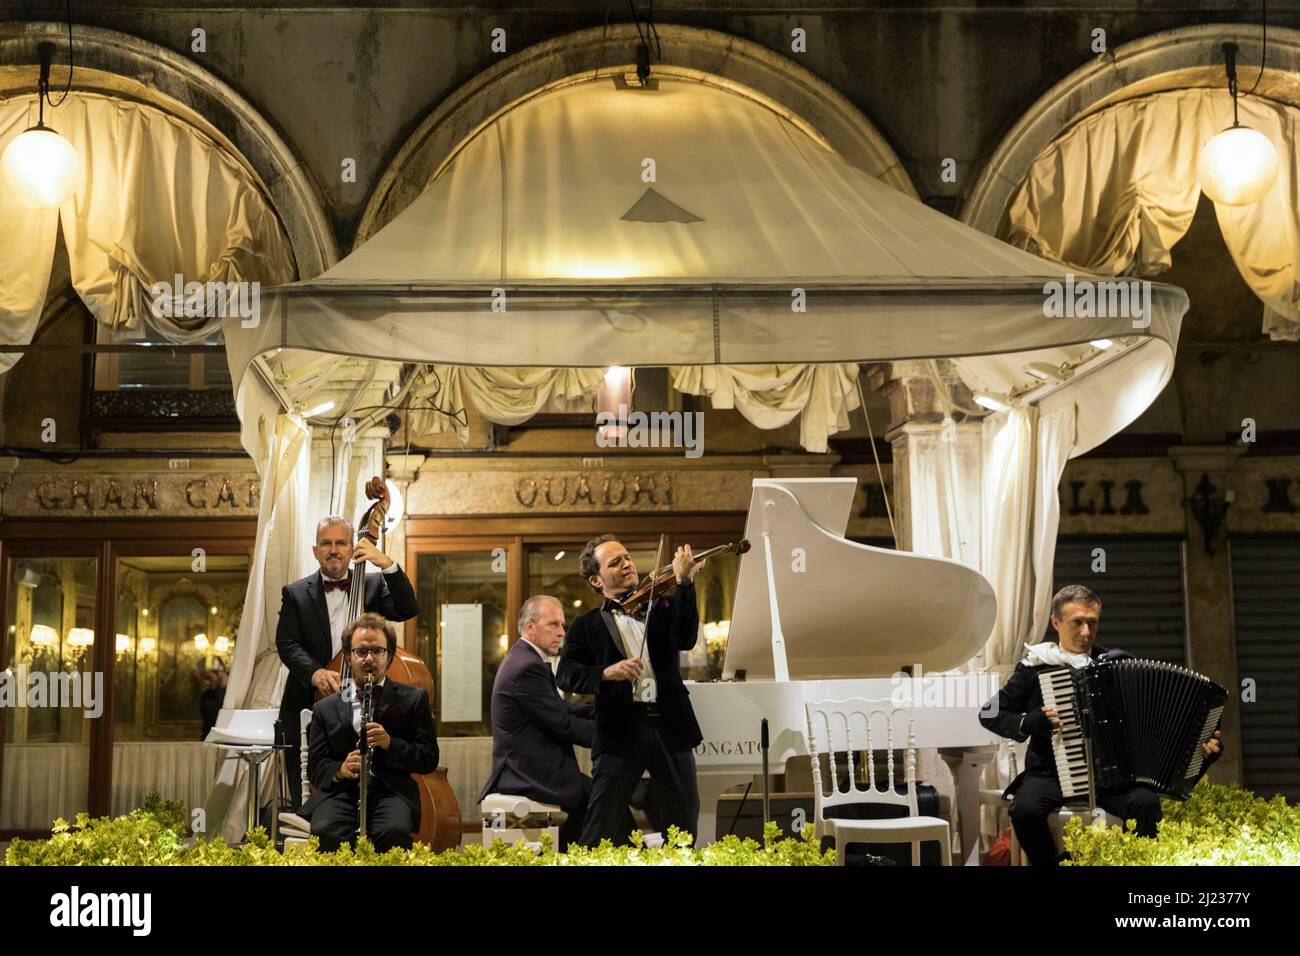 Italy, Venice, Piazza San Marko, classical musicians playing music at an outdoor cafe Stock Photo